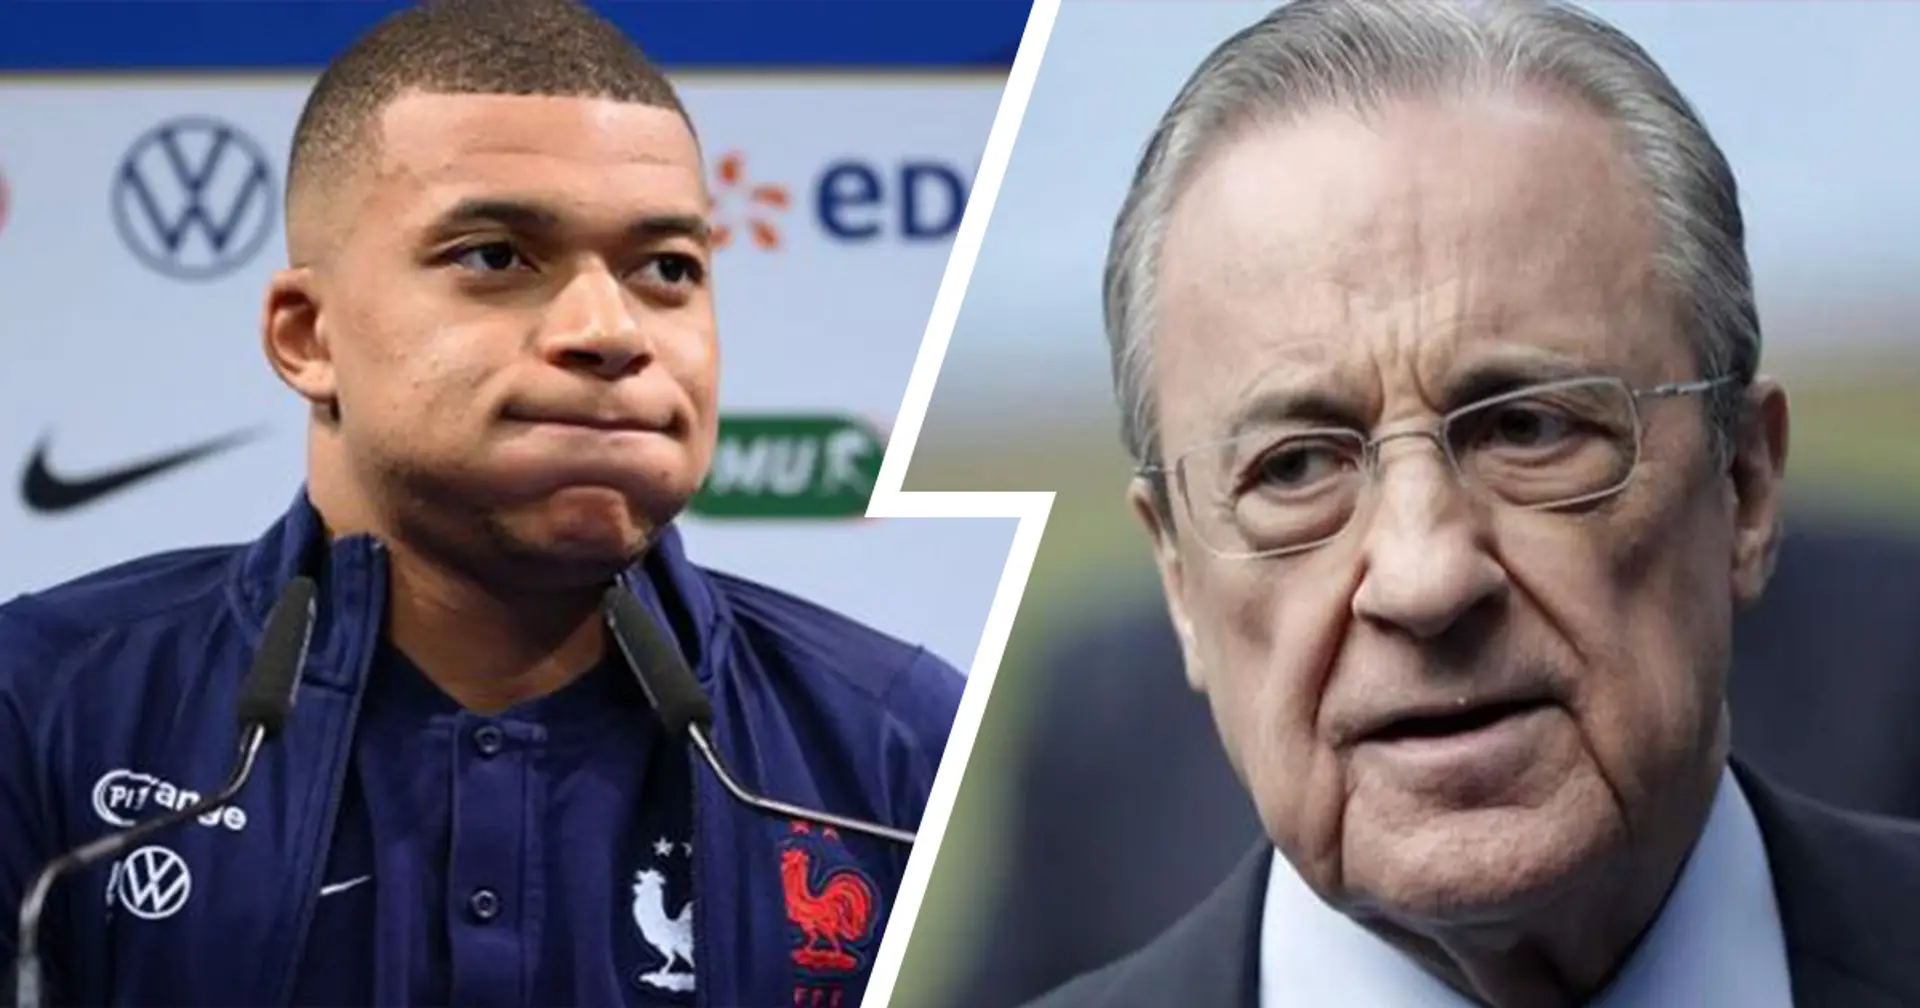 When will Real Madrid finally begin Mbappe talks? You asked, we answered